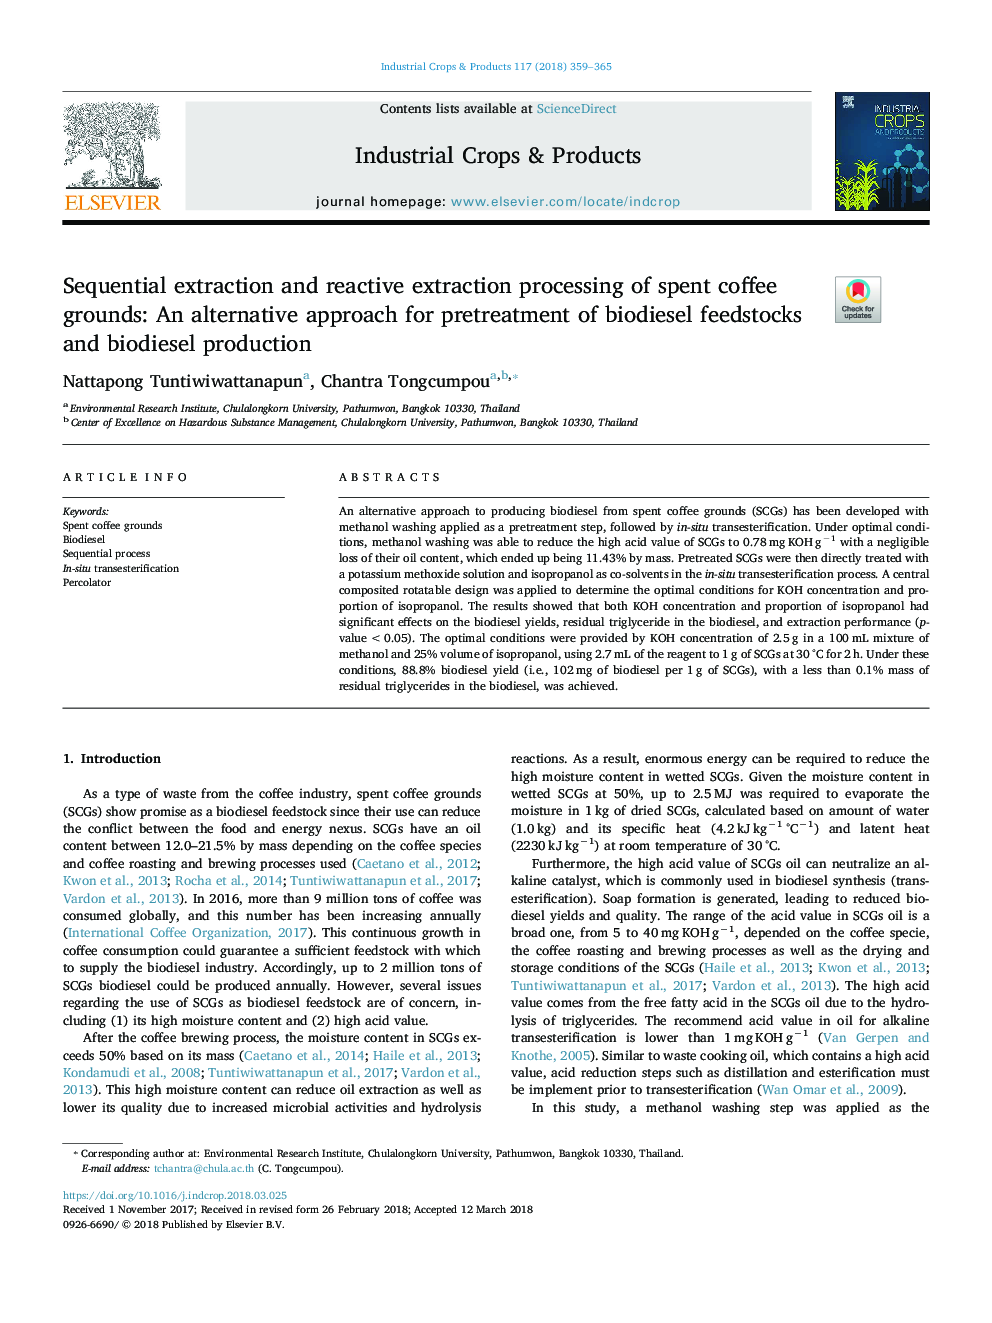 Sequential extraction and reactive extraction processing of spent coffee grounds: An alternative approach for pretreatment of biodiesel feedstocks and biodiesel production